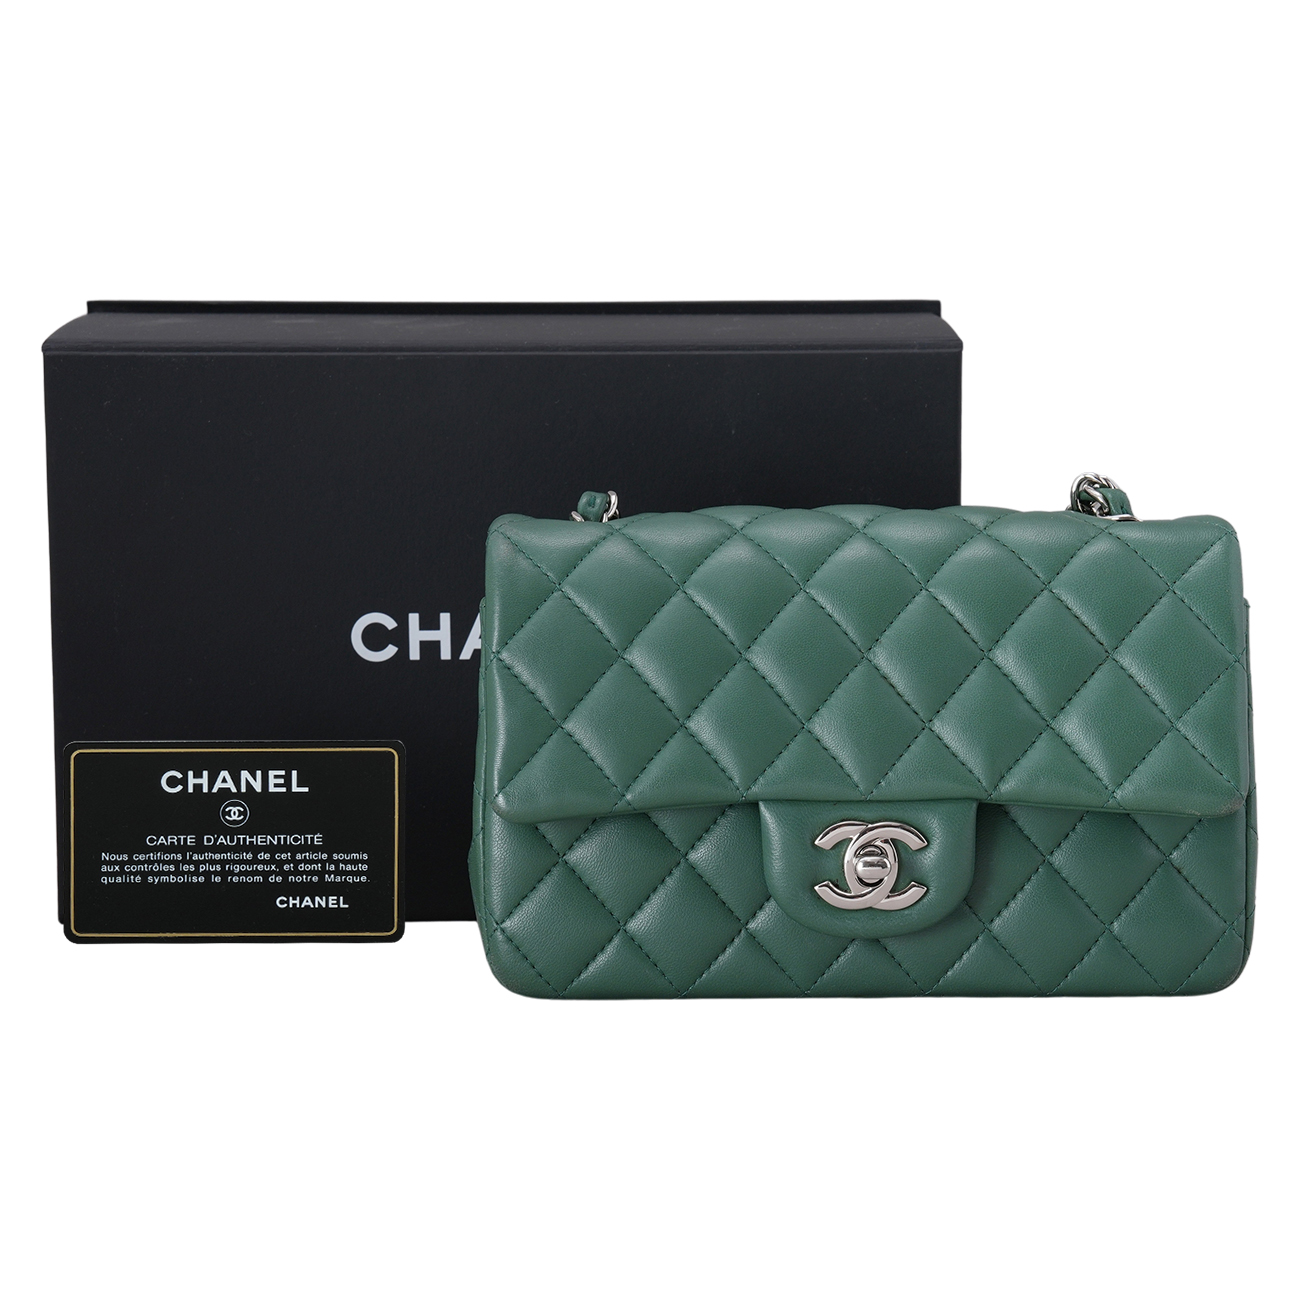 CHANEL(USED)샤넬 A69900 램스킨 클래식 뉴미니 크로스백